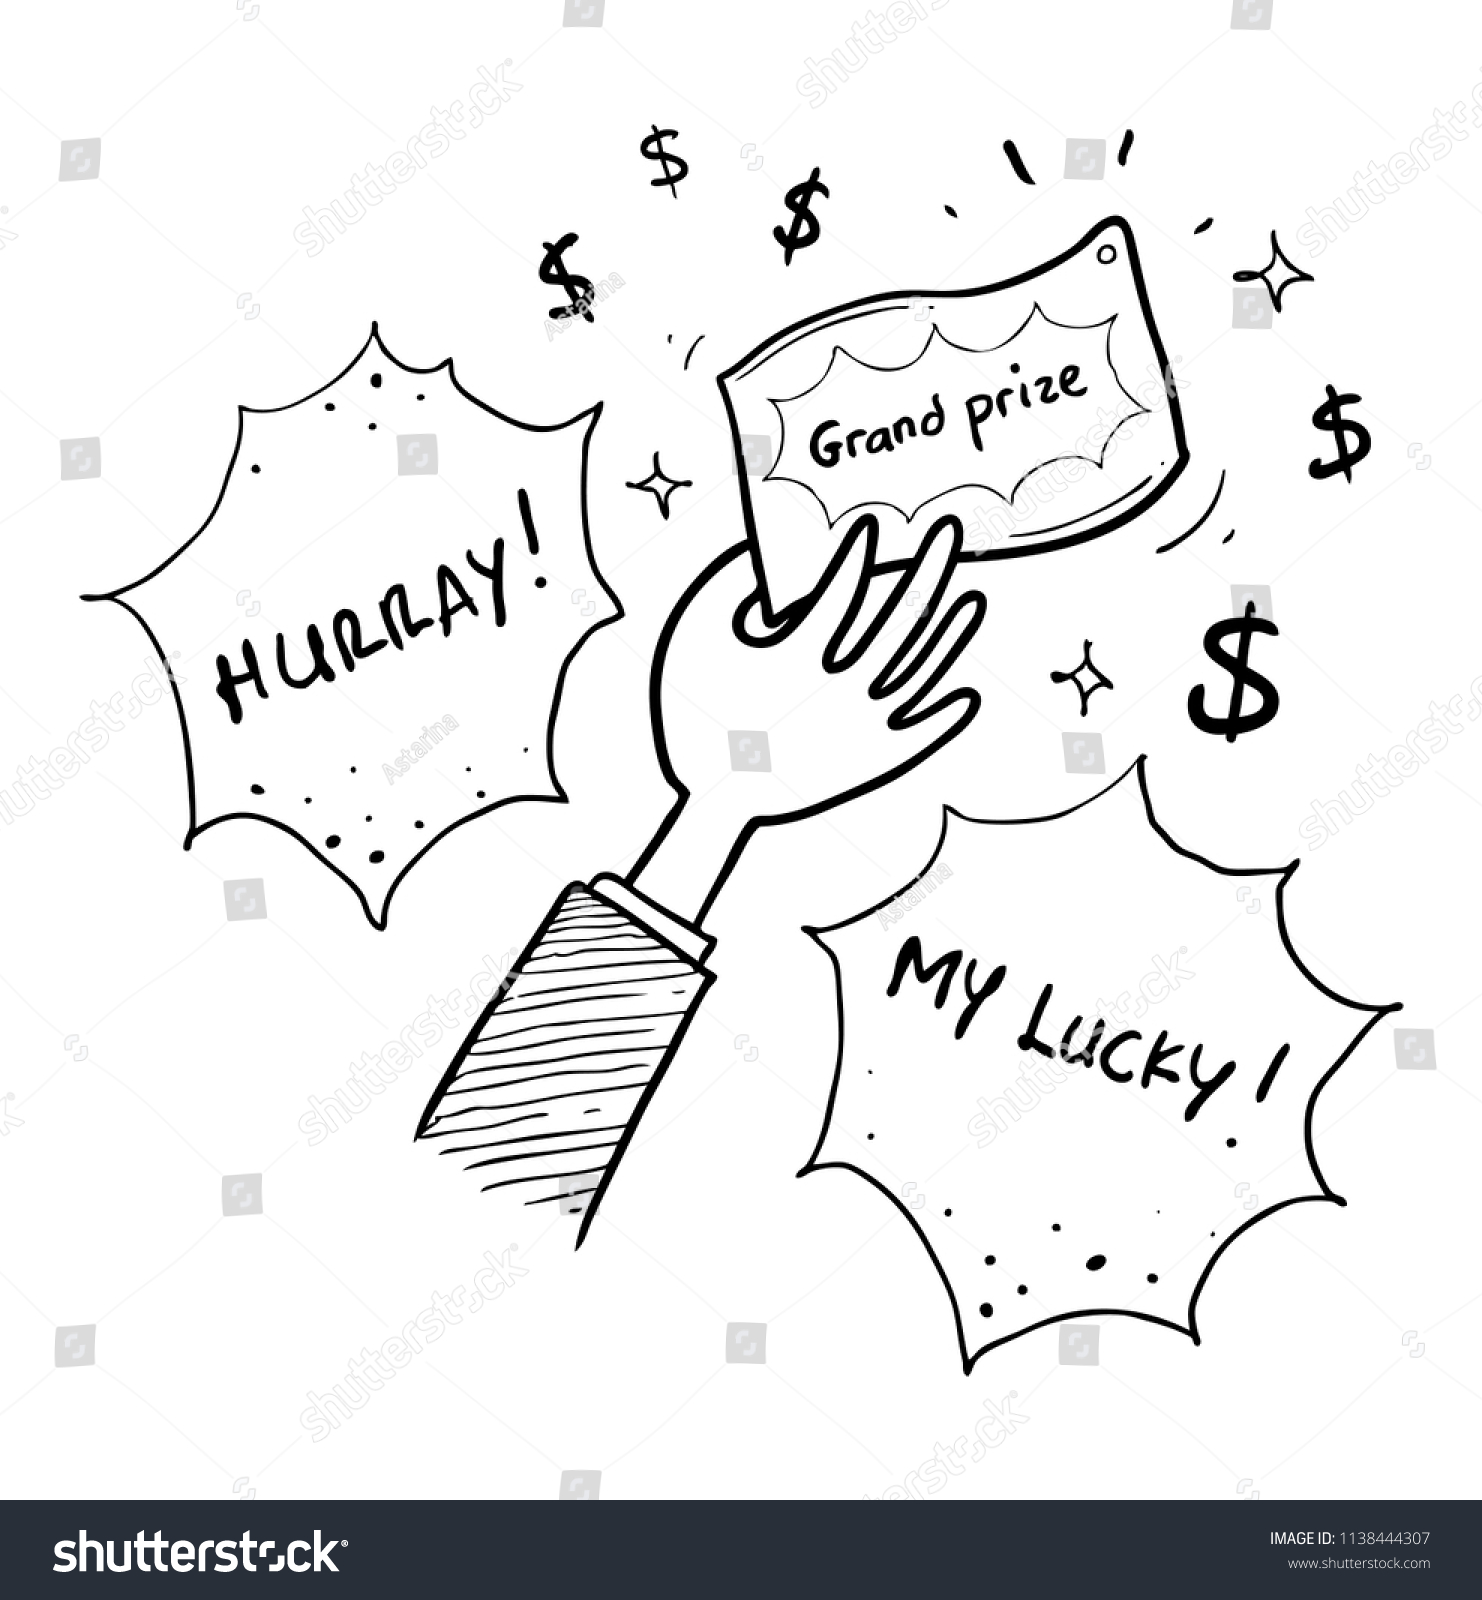 Winning Lottery Drawing Stock Vector (Royalty Free) 1138444307